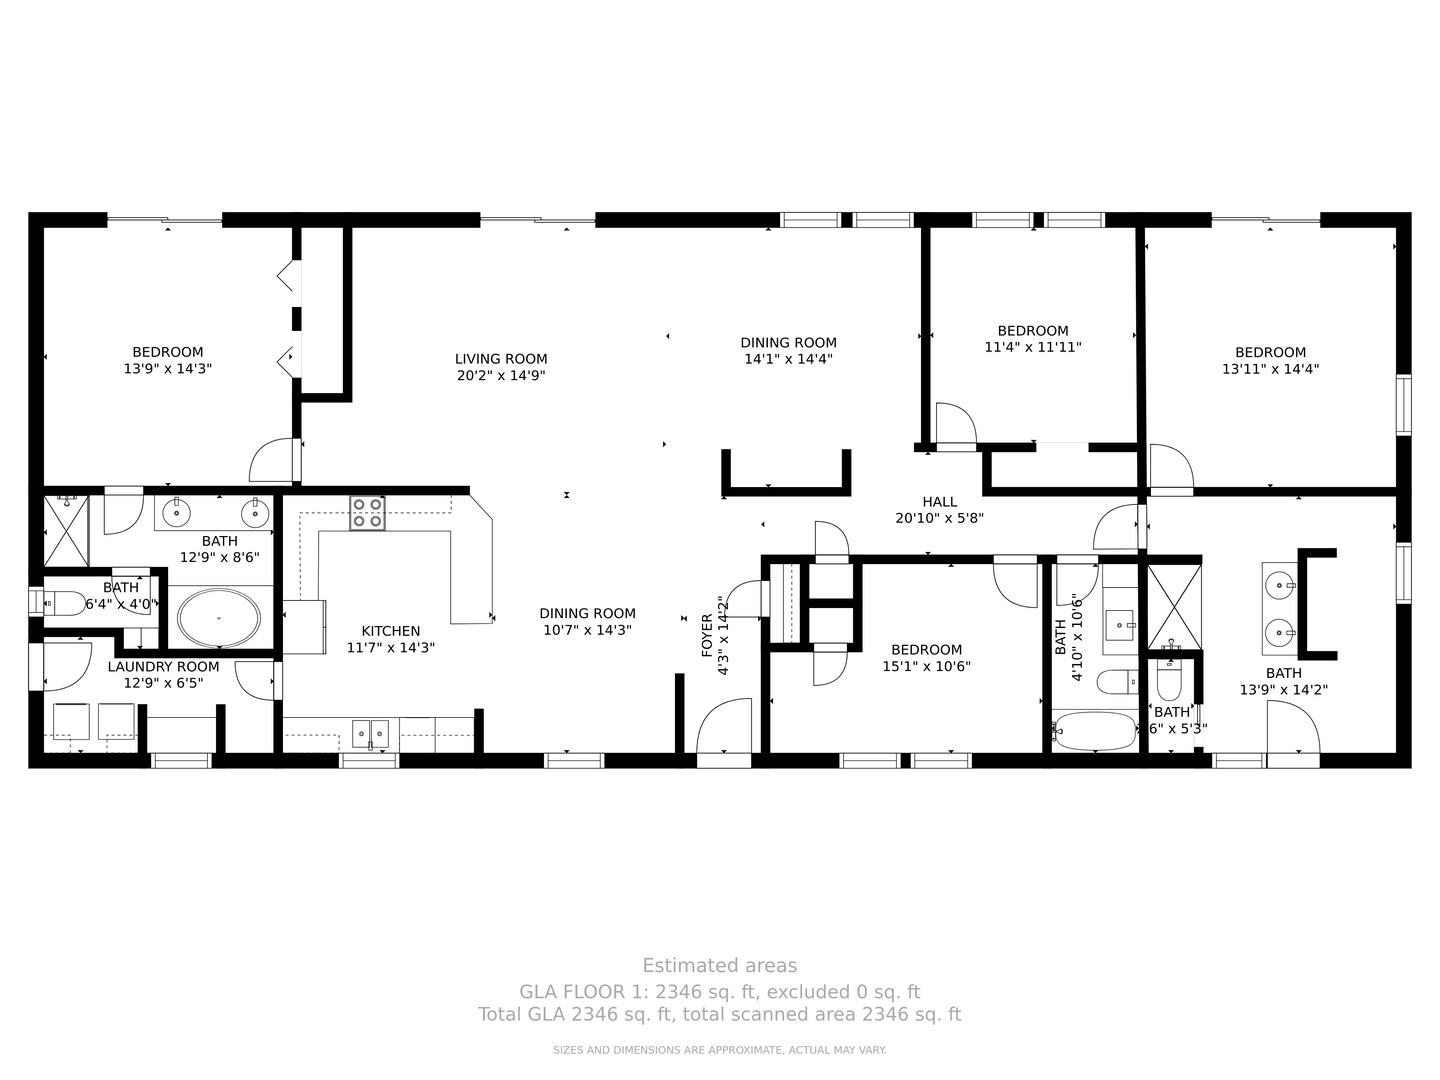 The bungalow's floorplan showing the layout